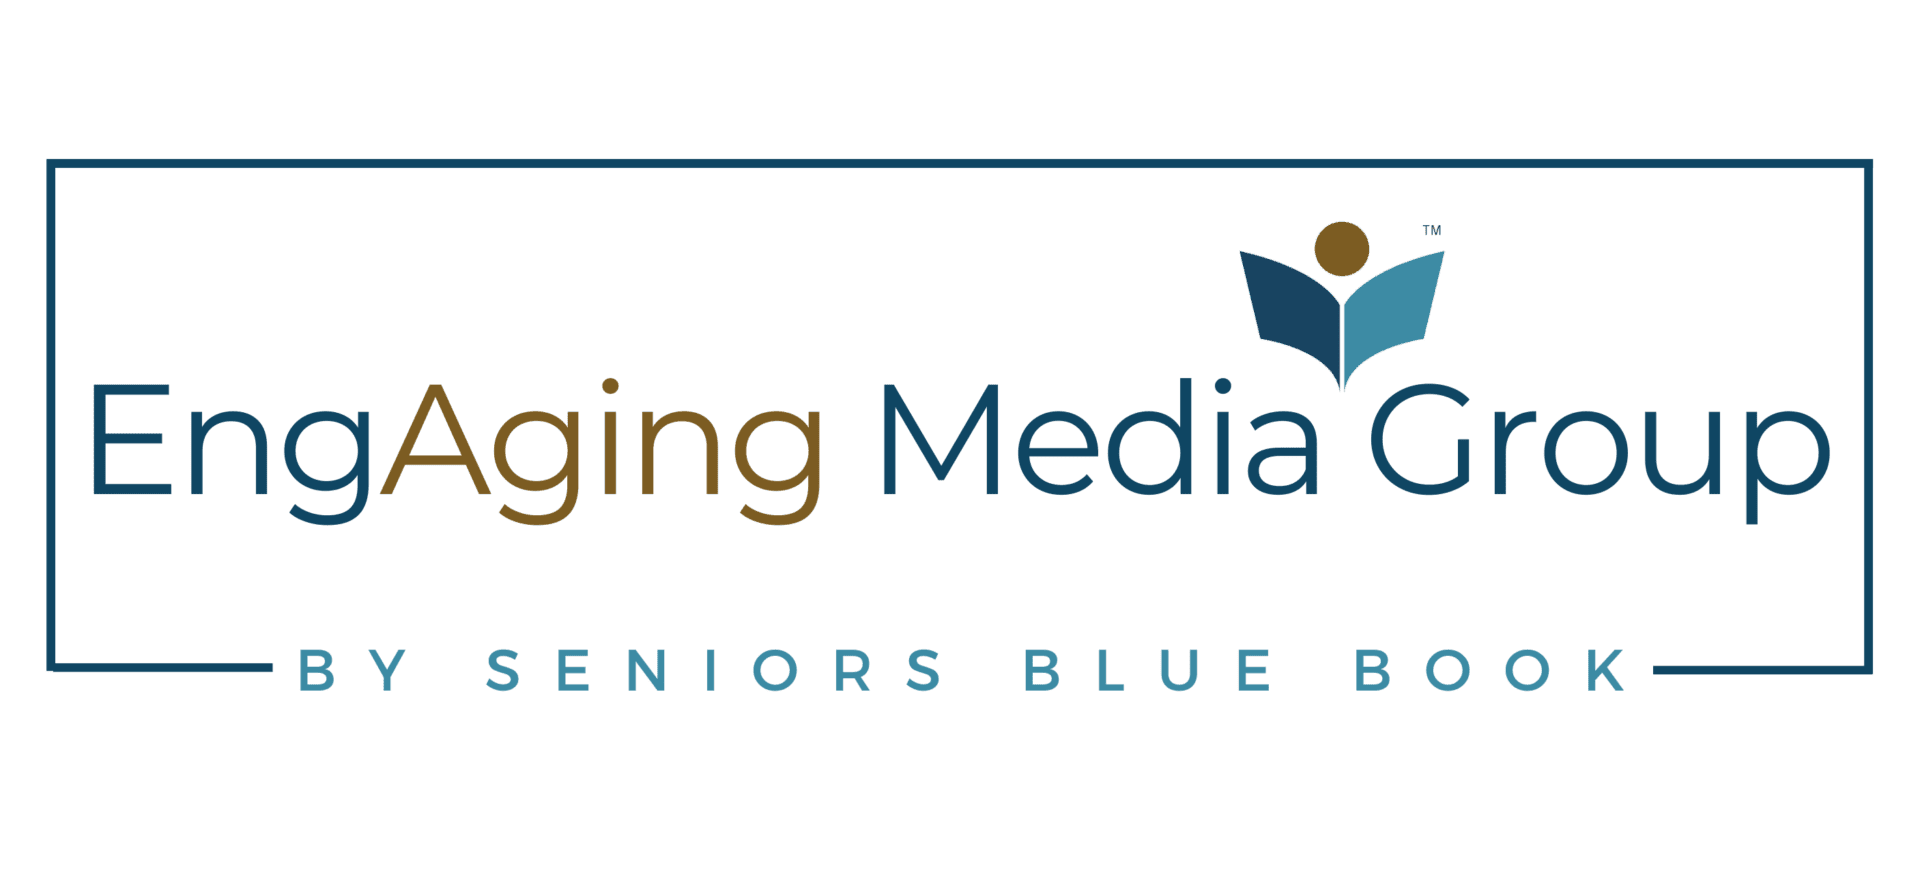 EngAging Media Group